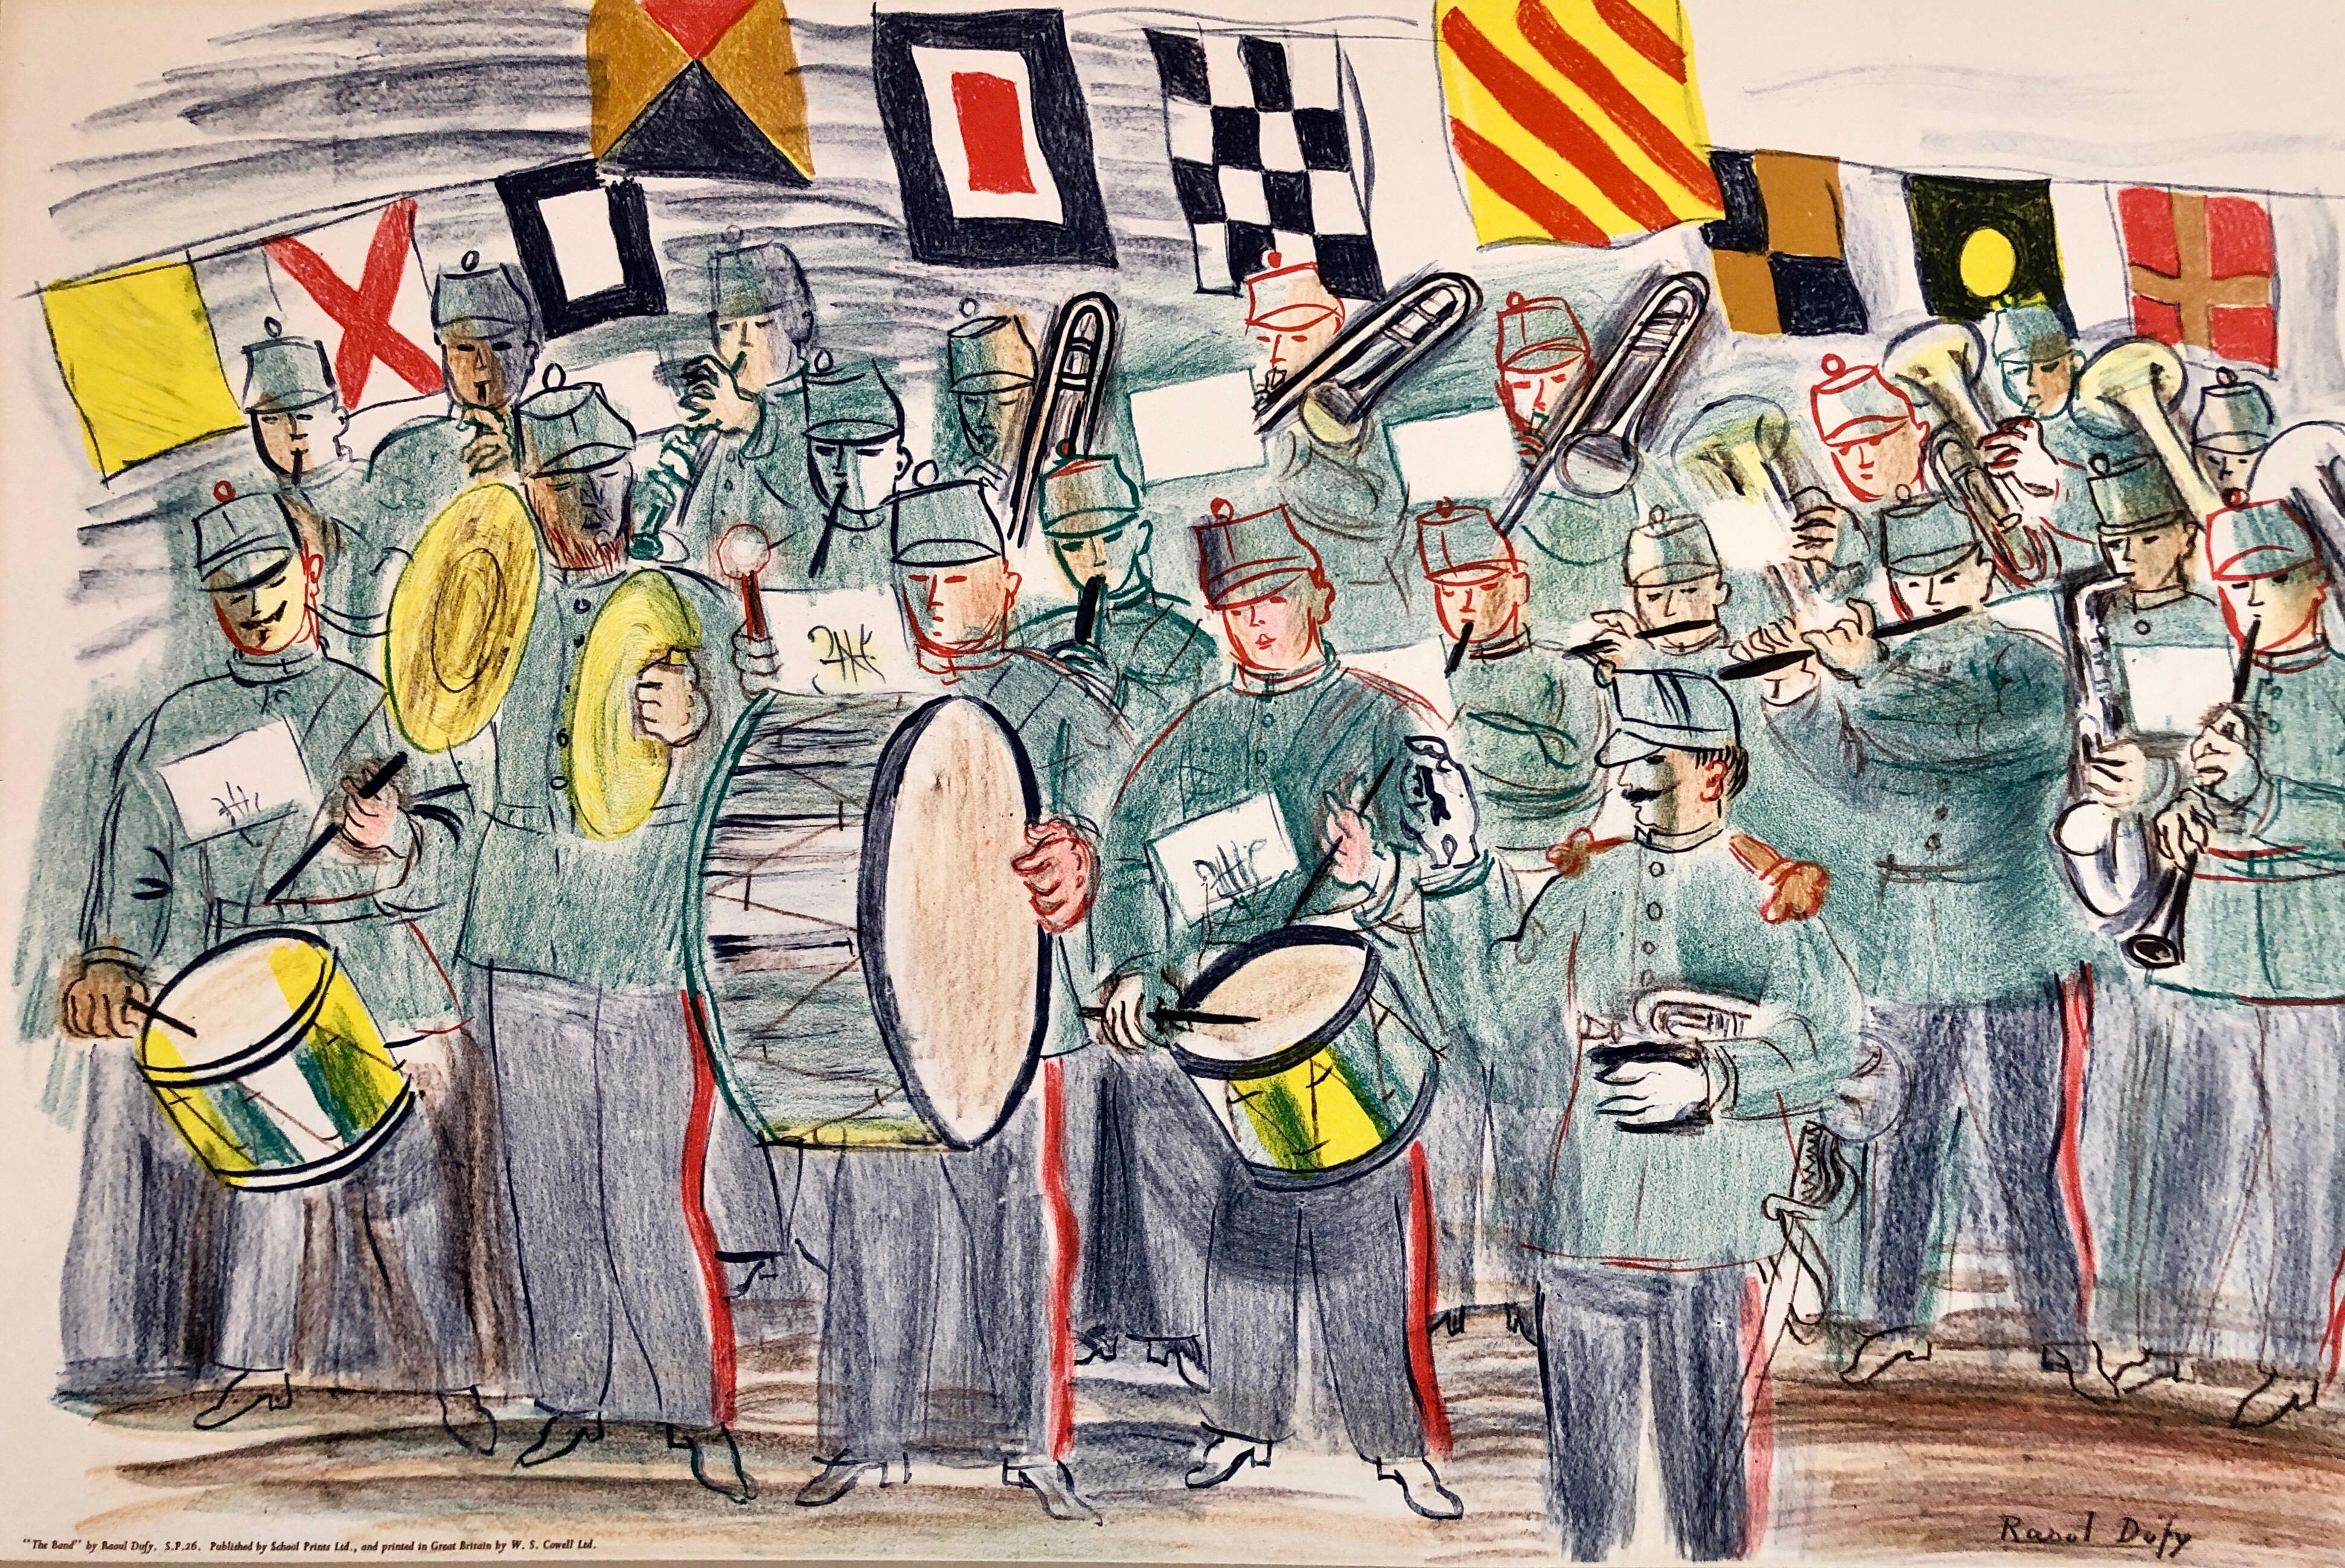 (after) Raoul Dufy Figurative Print – Raoul Dufy School Drucke Bunte modernistische Zeichnungslithographie Marching Band